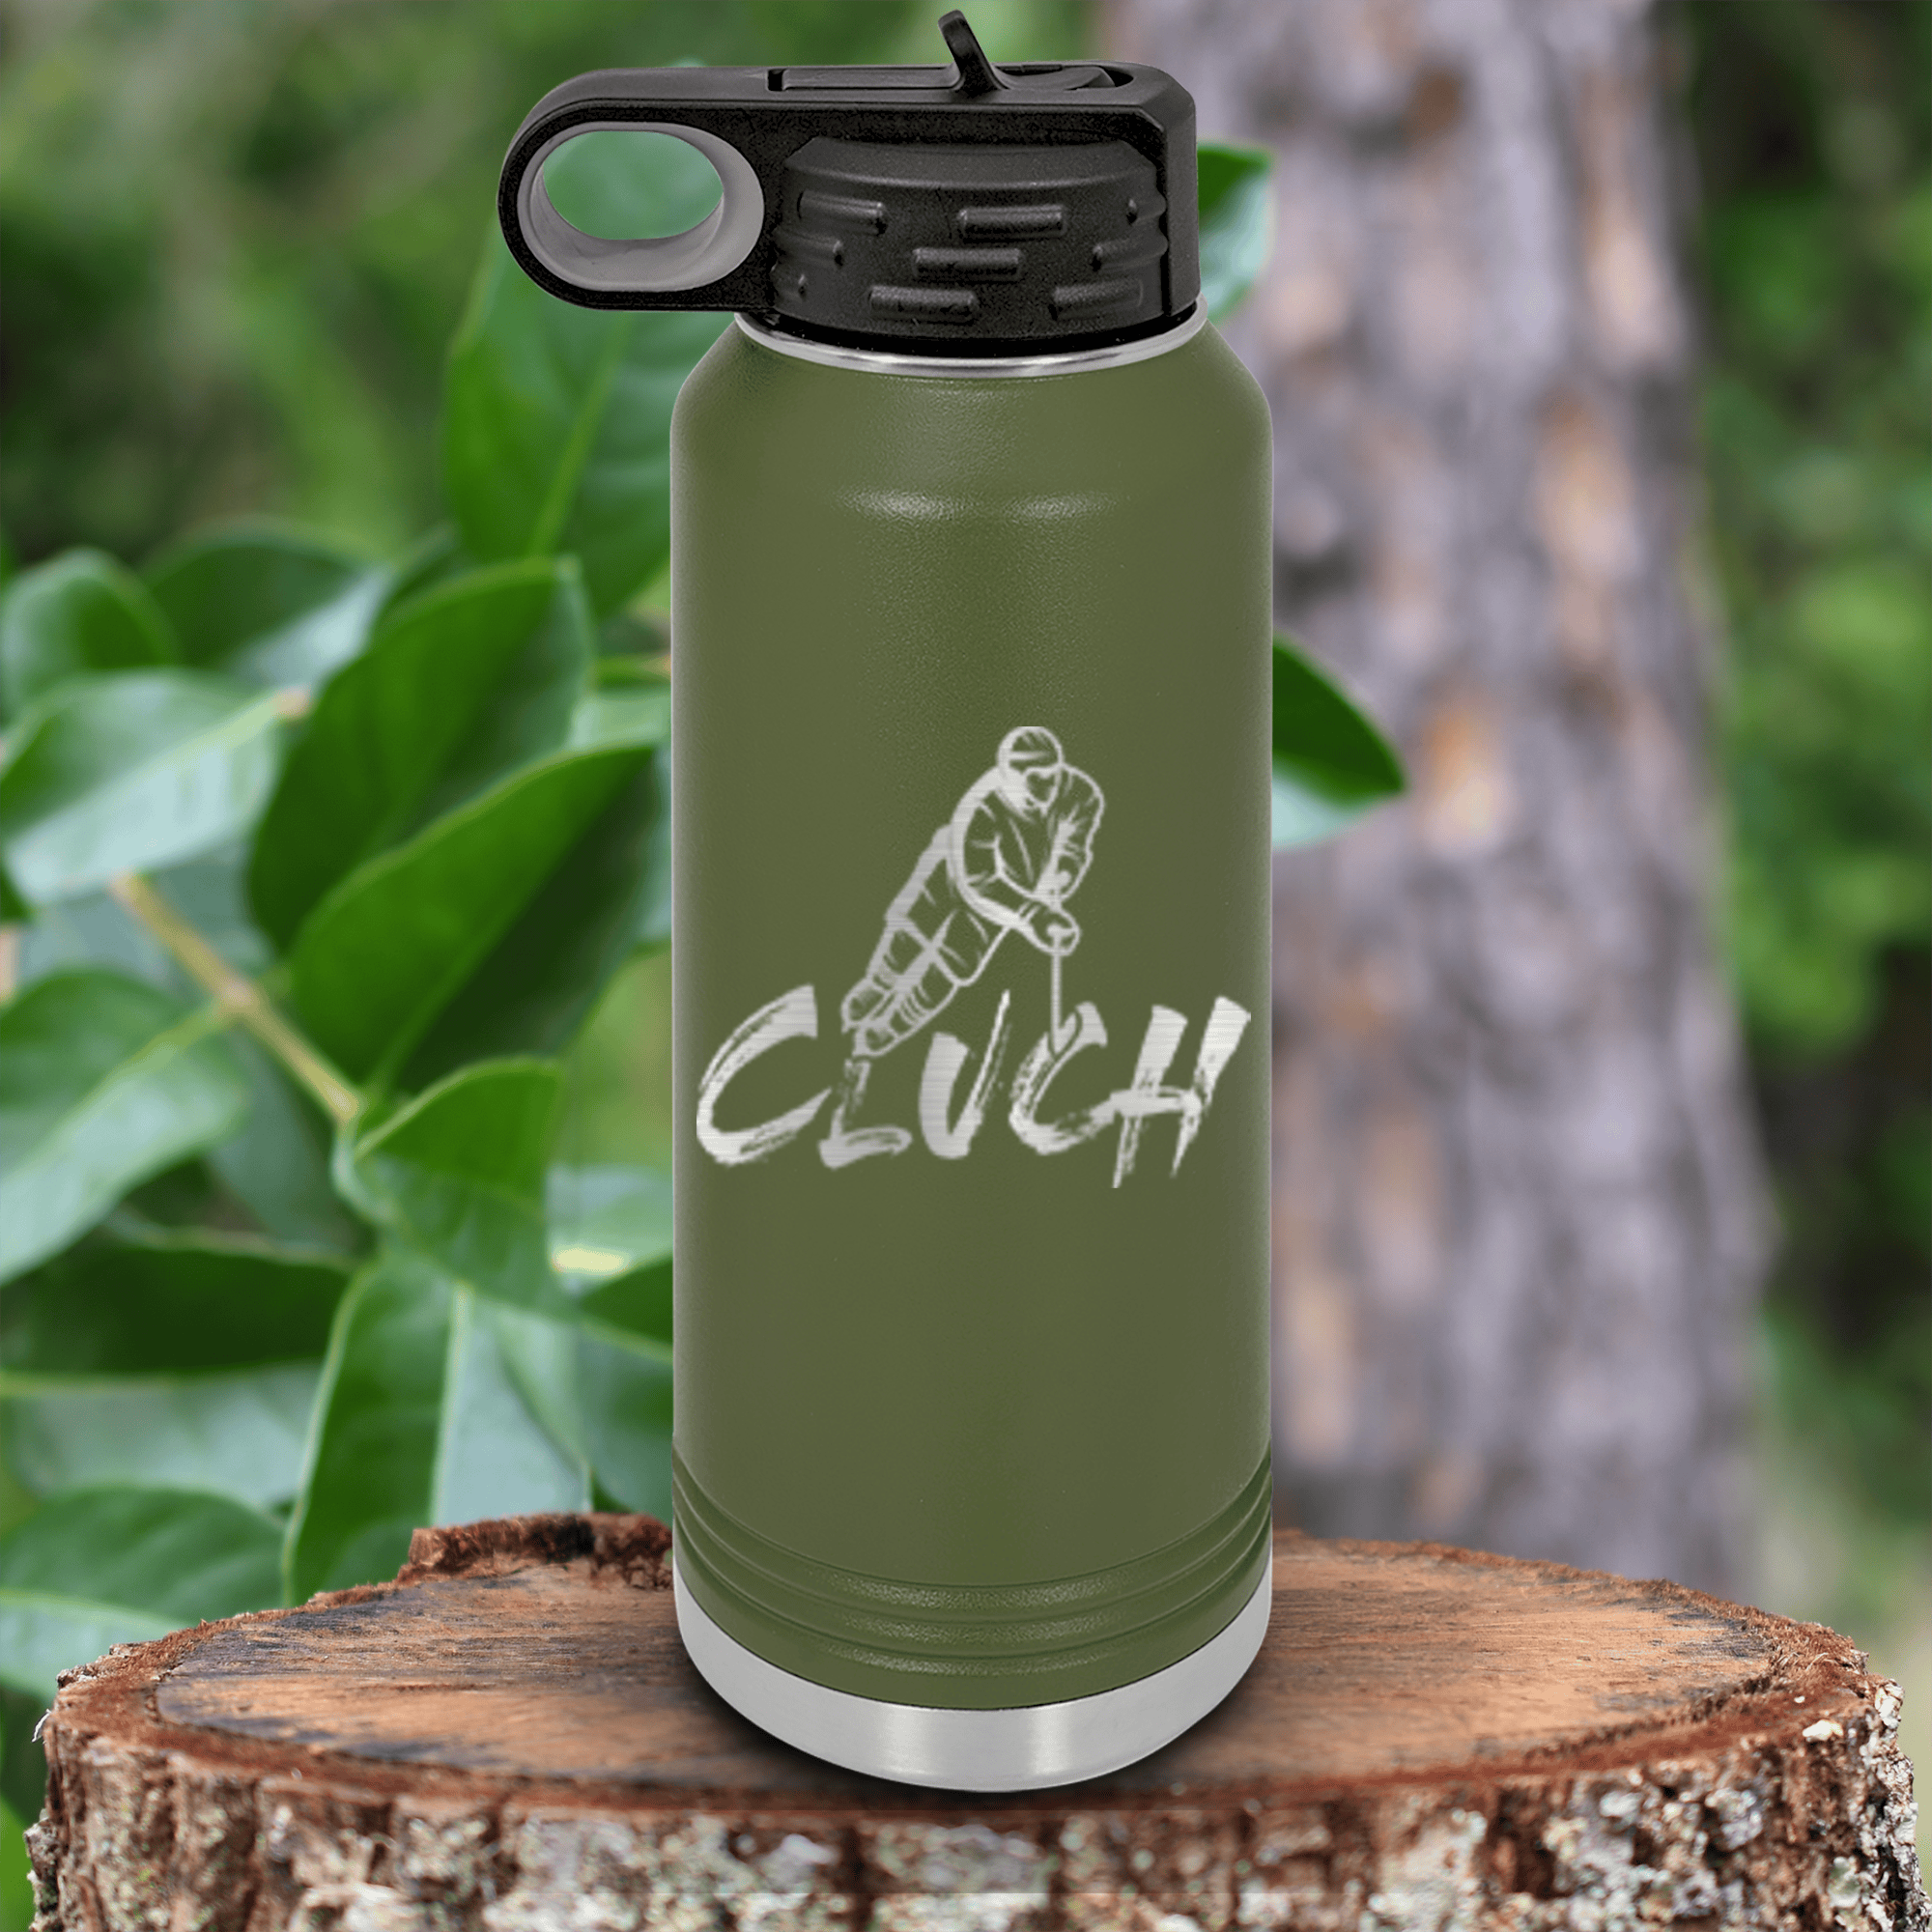 Military Green Hockey Water Bottle With Net Minders Nectar Design